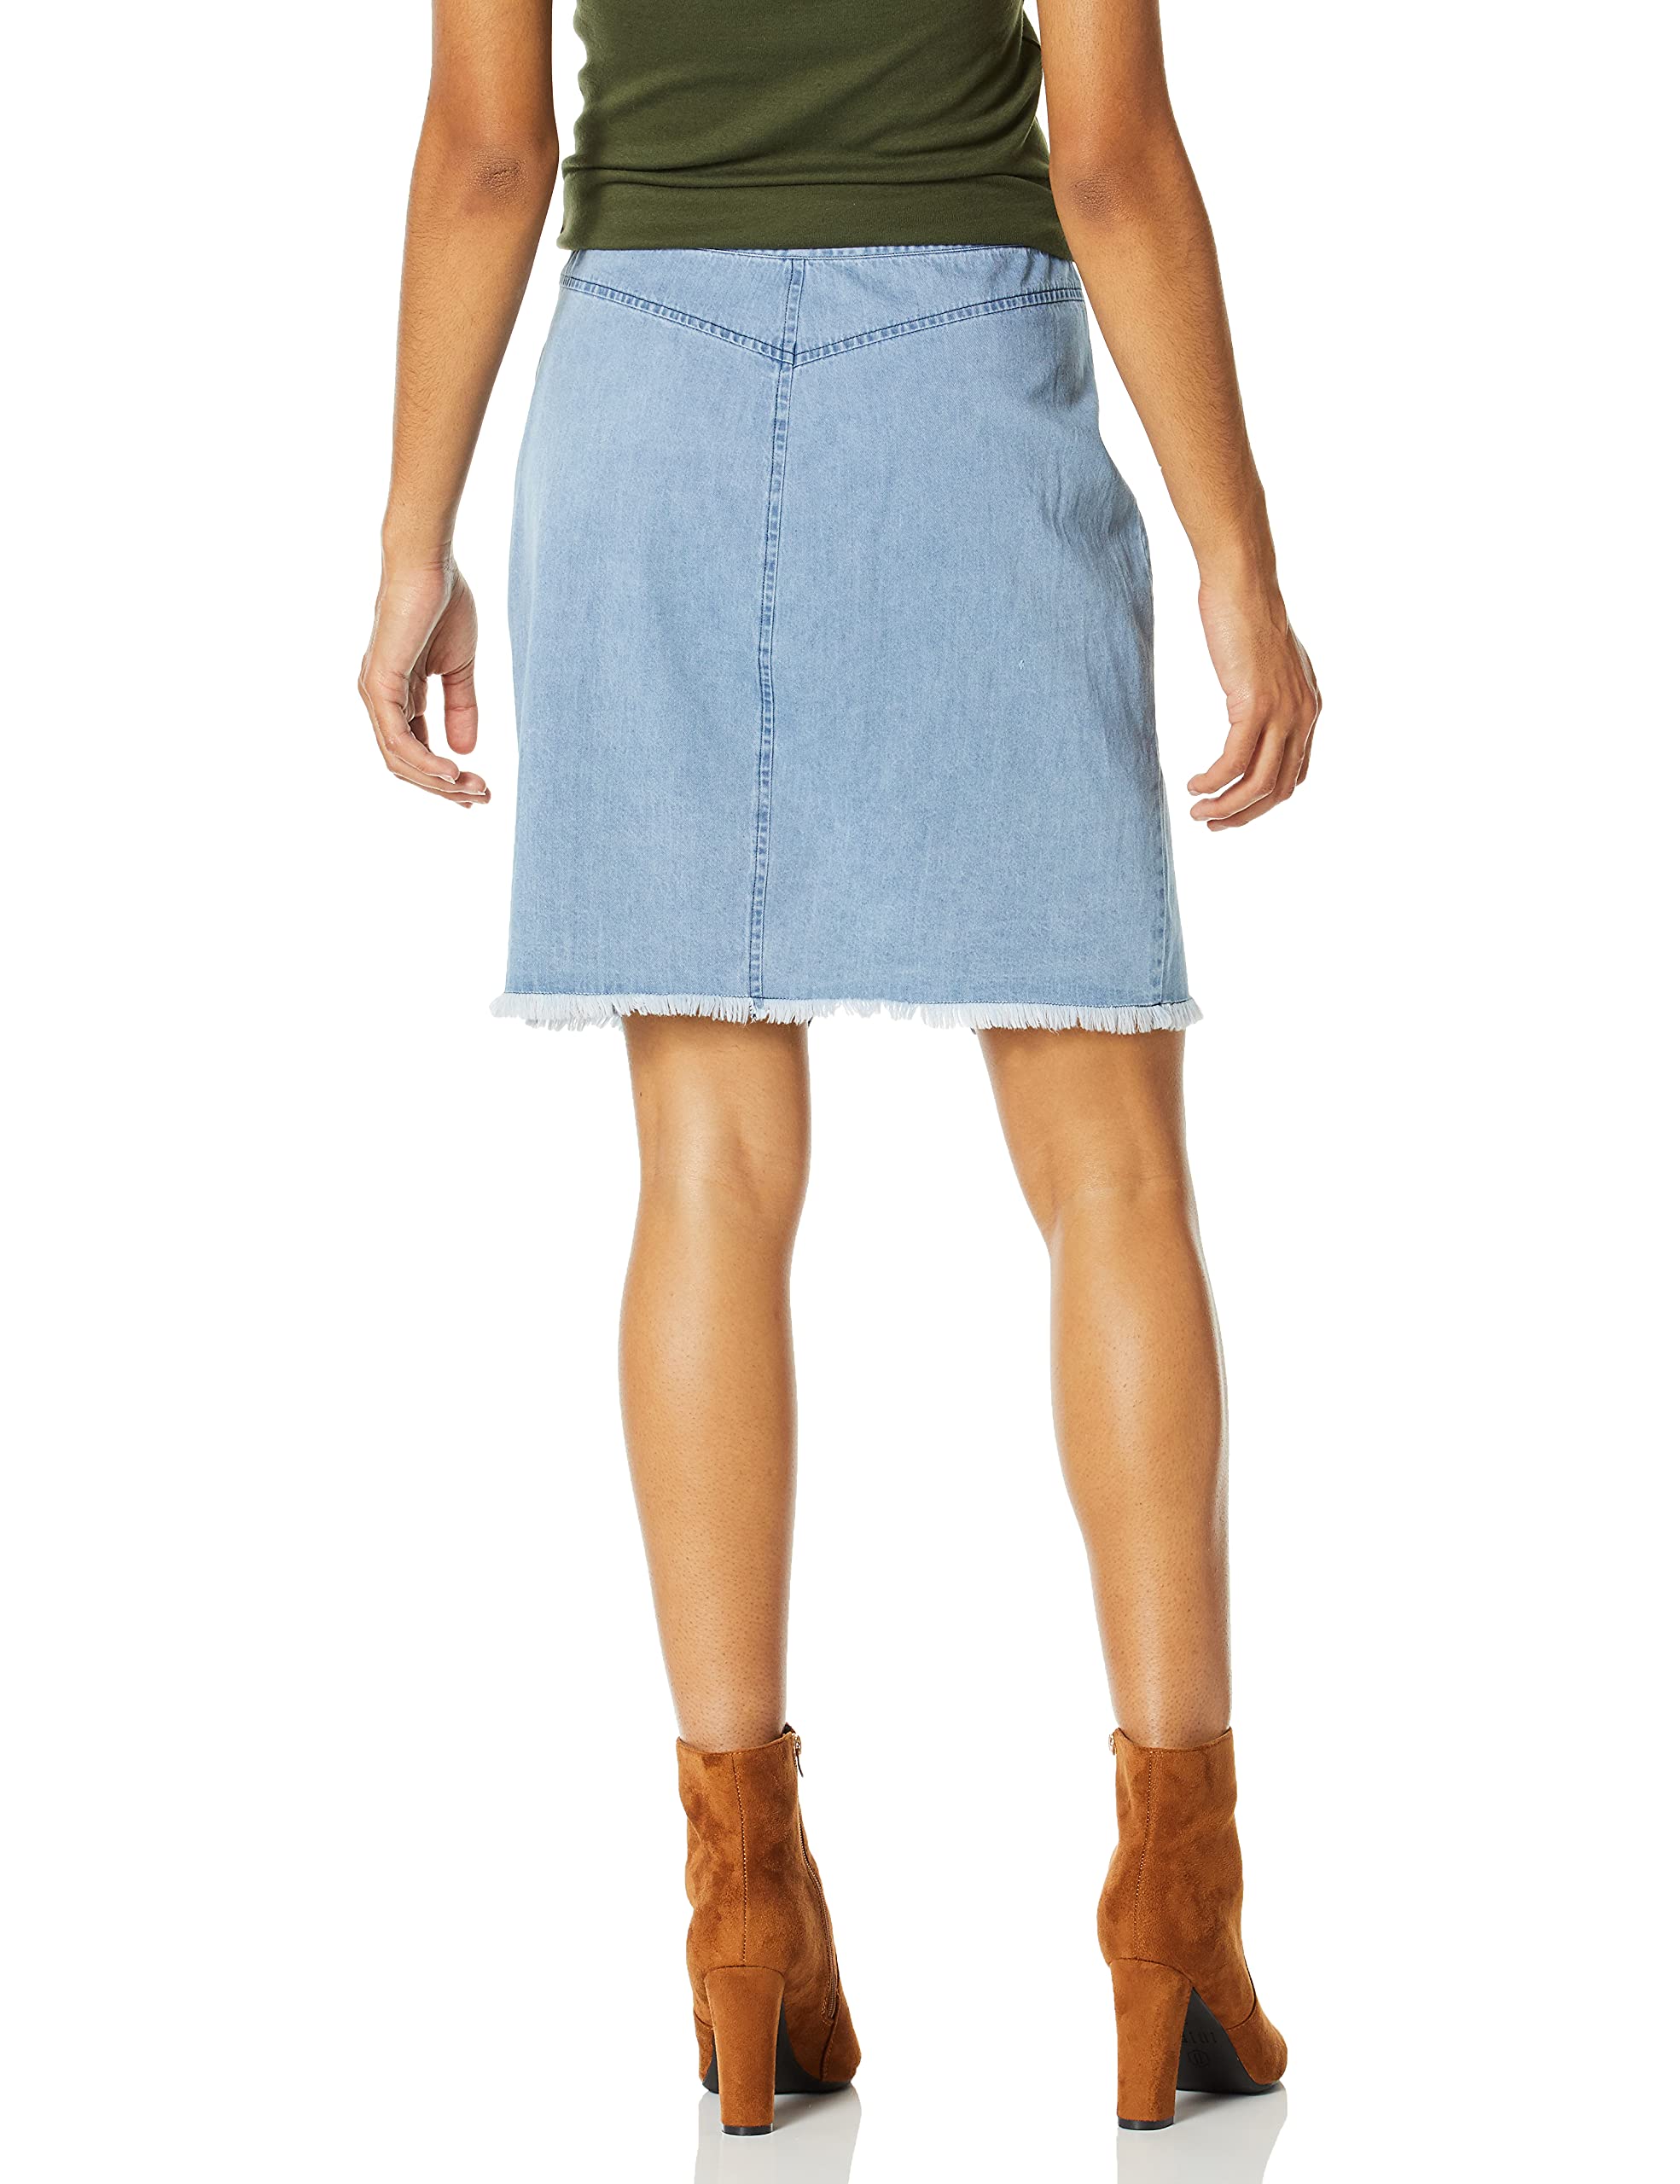 cupcakes and cashmere Women's Yvette Chambray Pencil Skirt